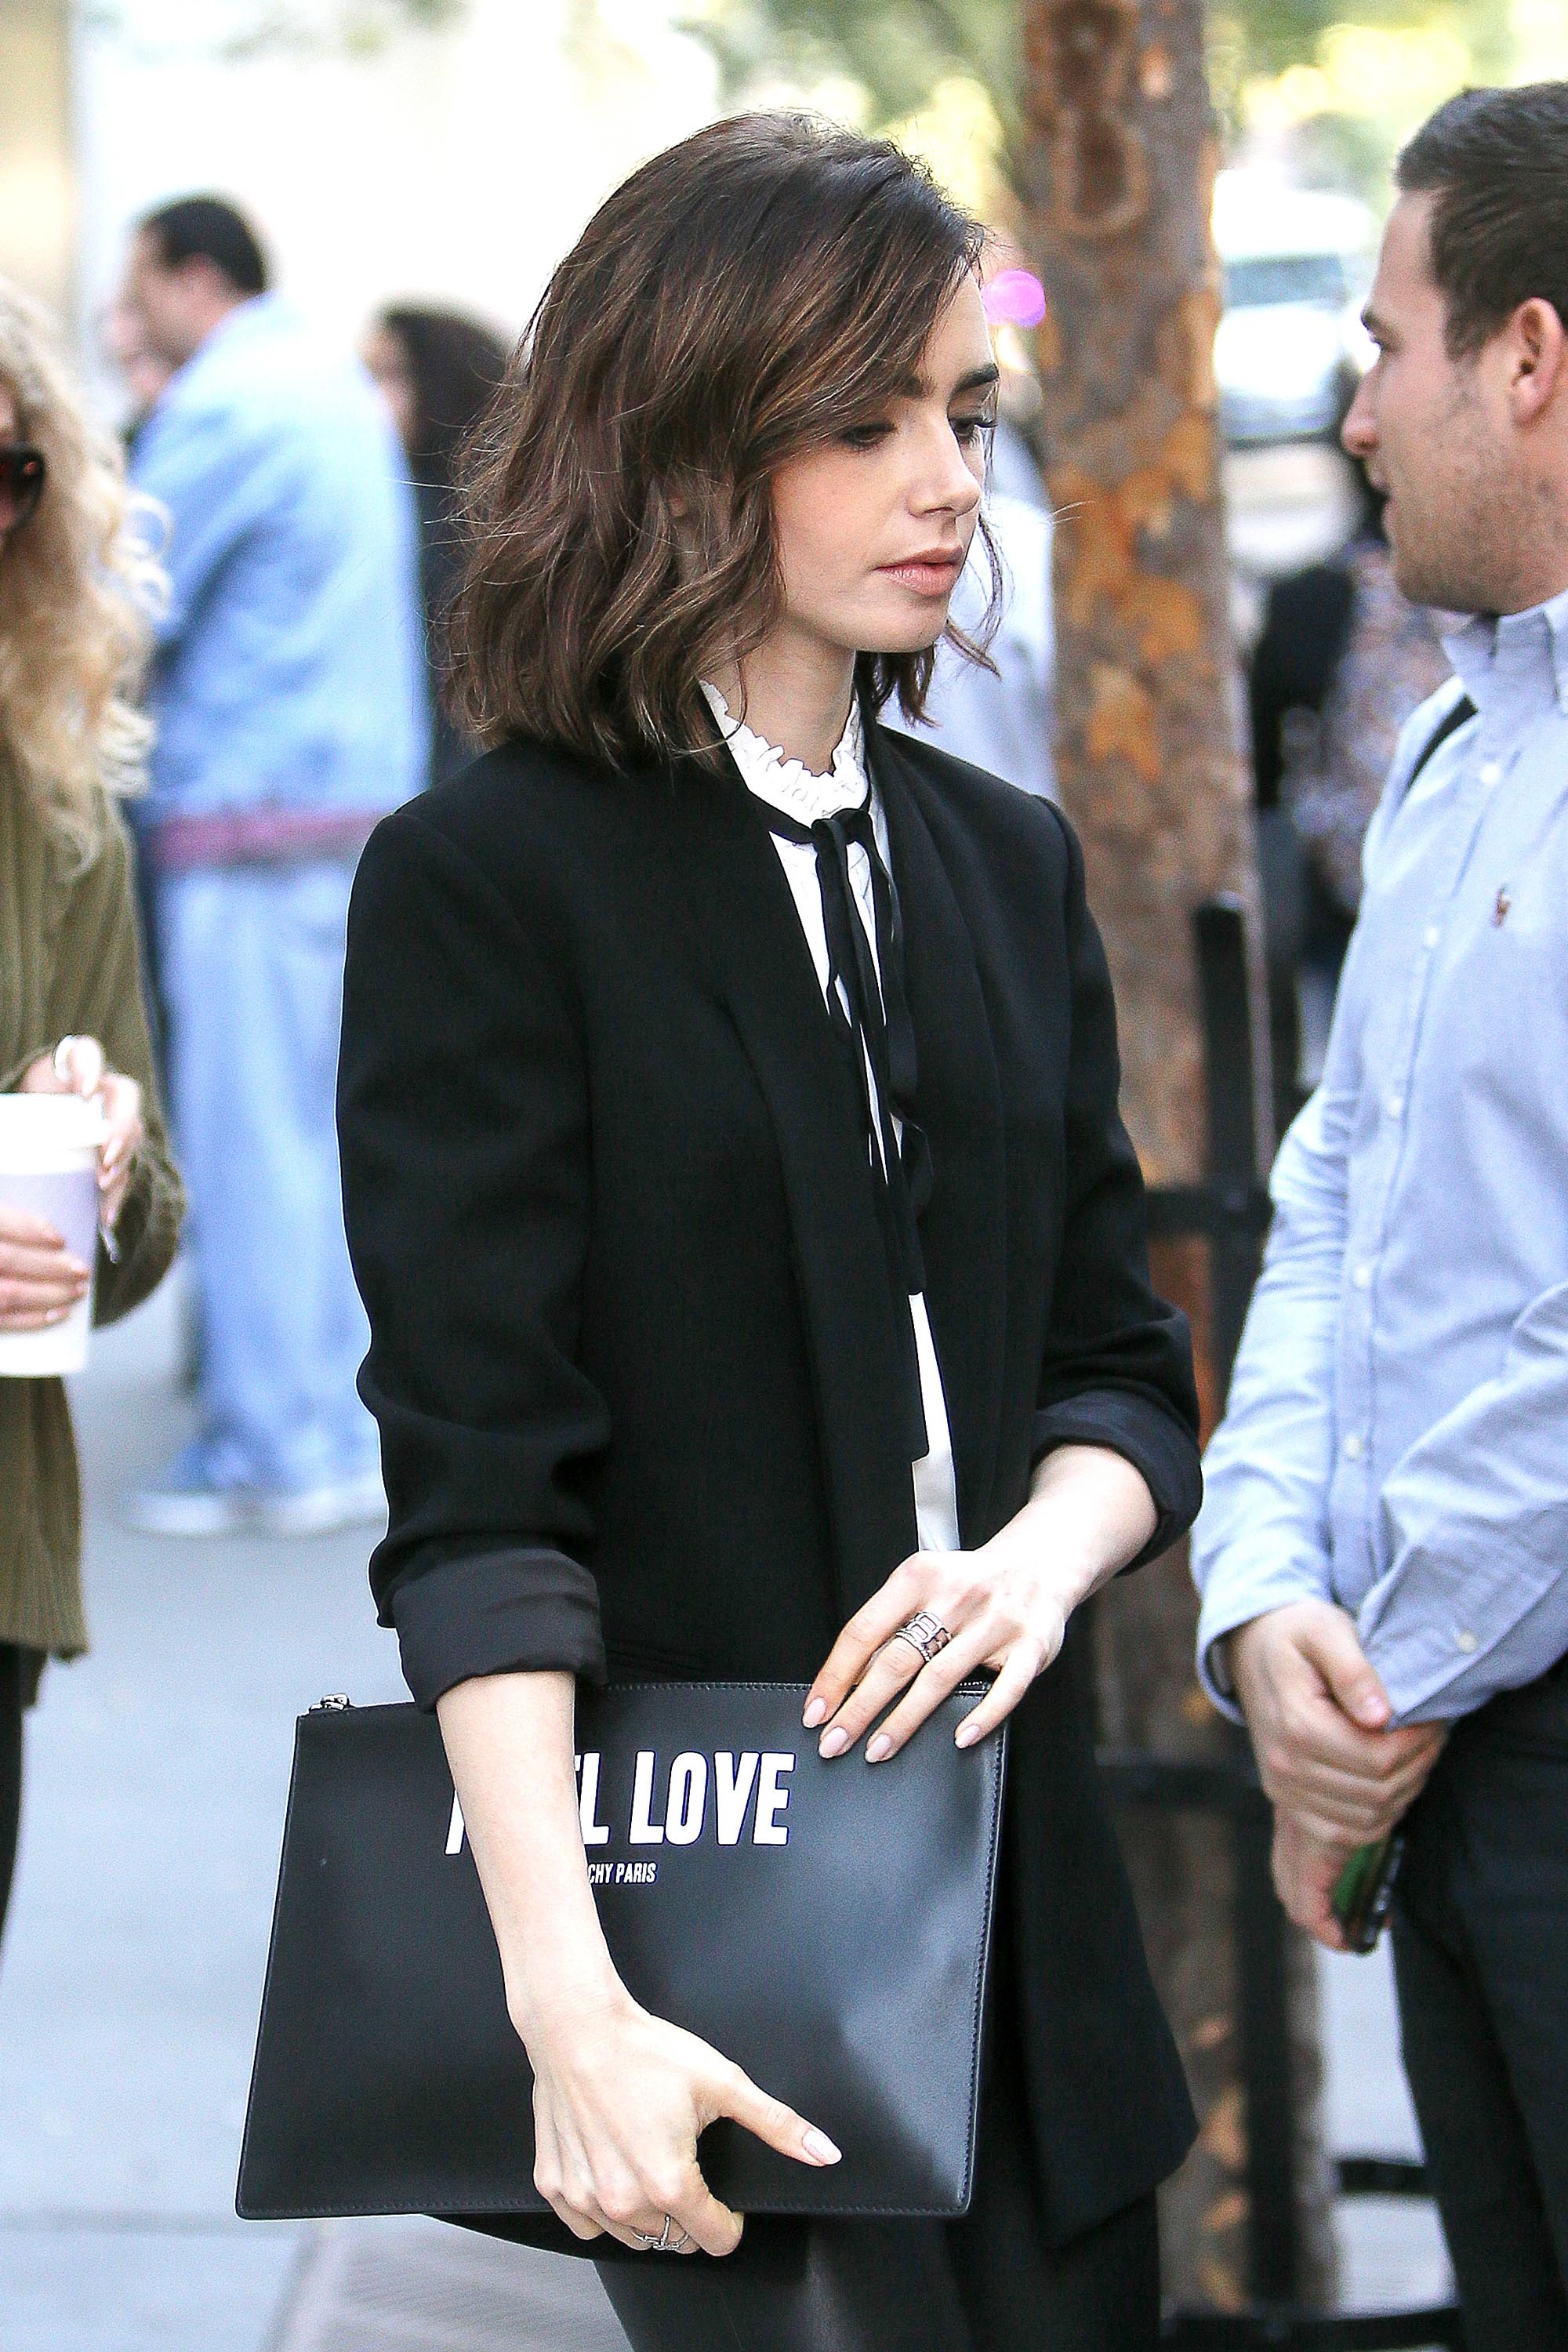 Lily Collins out and about in New York City